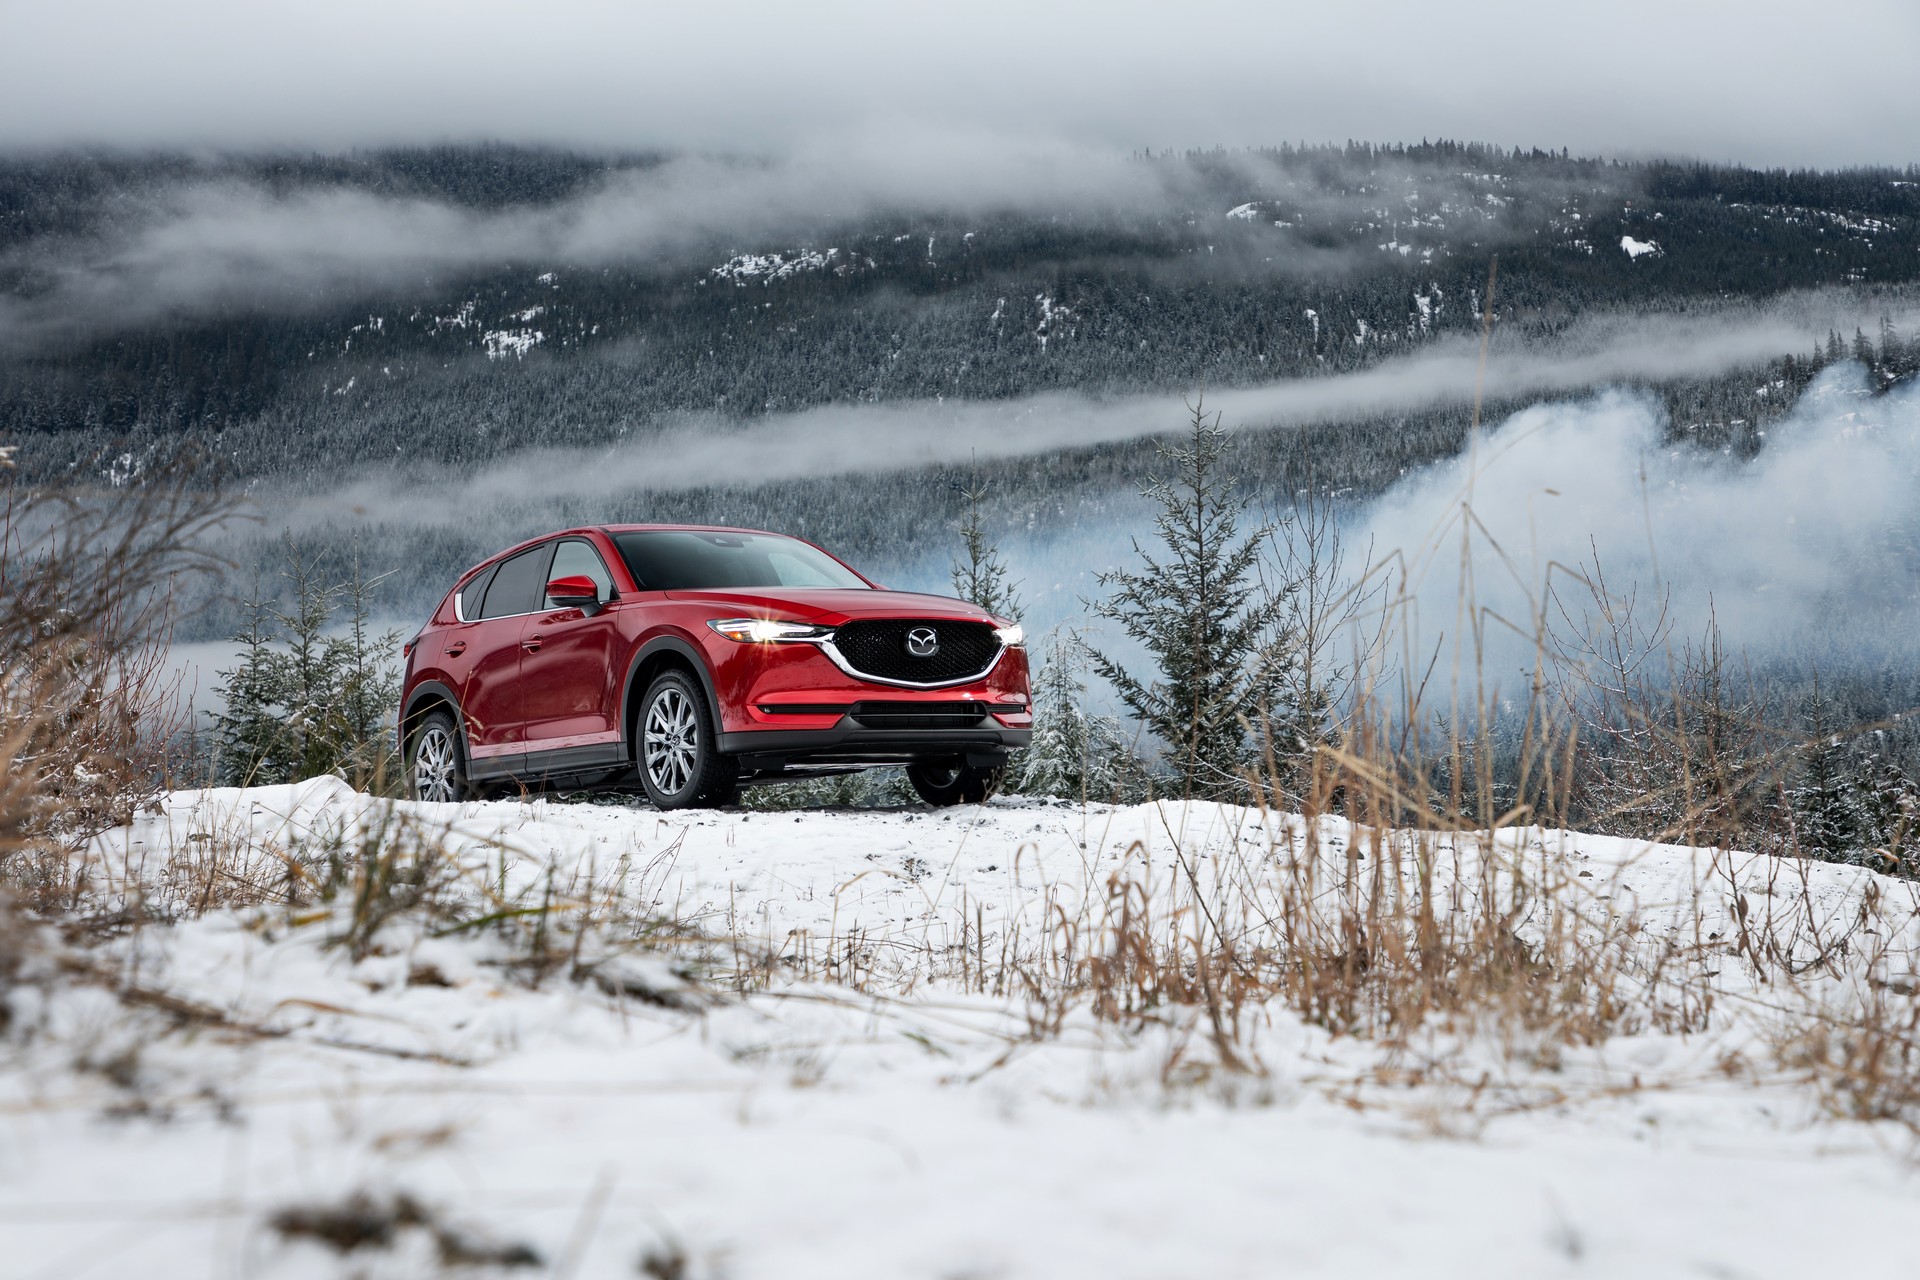 2020 Mazda Cx 5 Gains More Power And Equipment But Prices